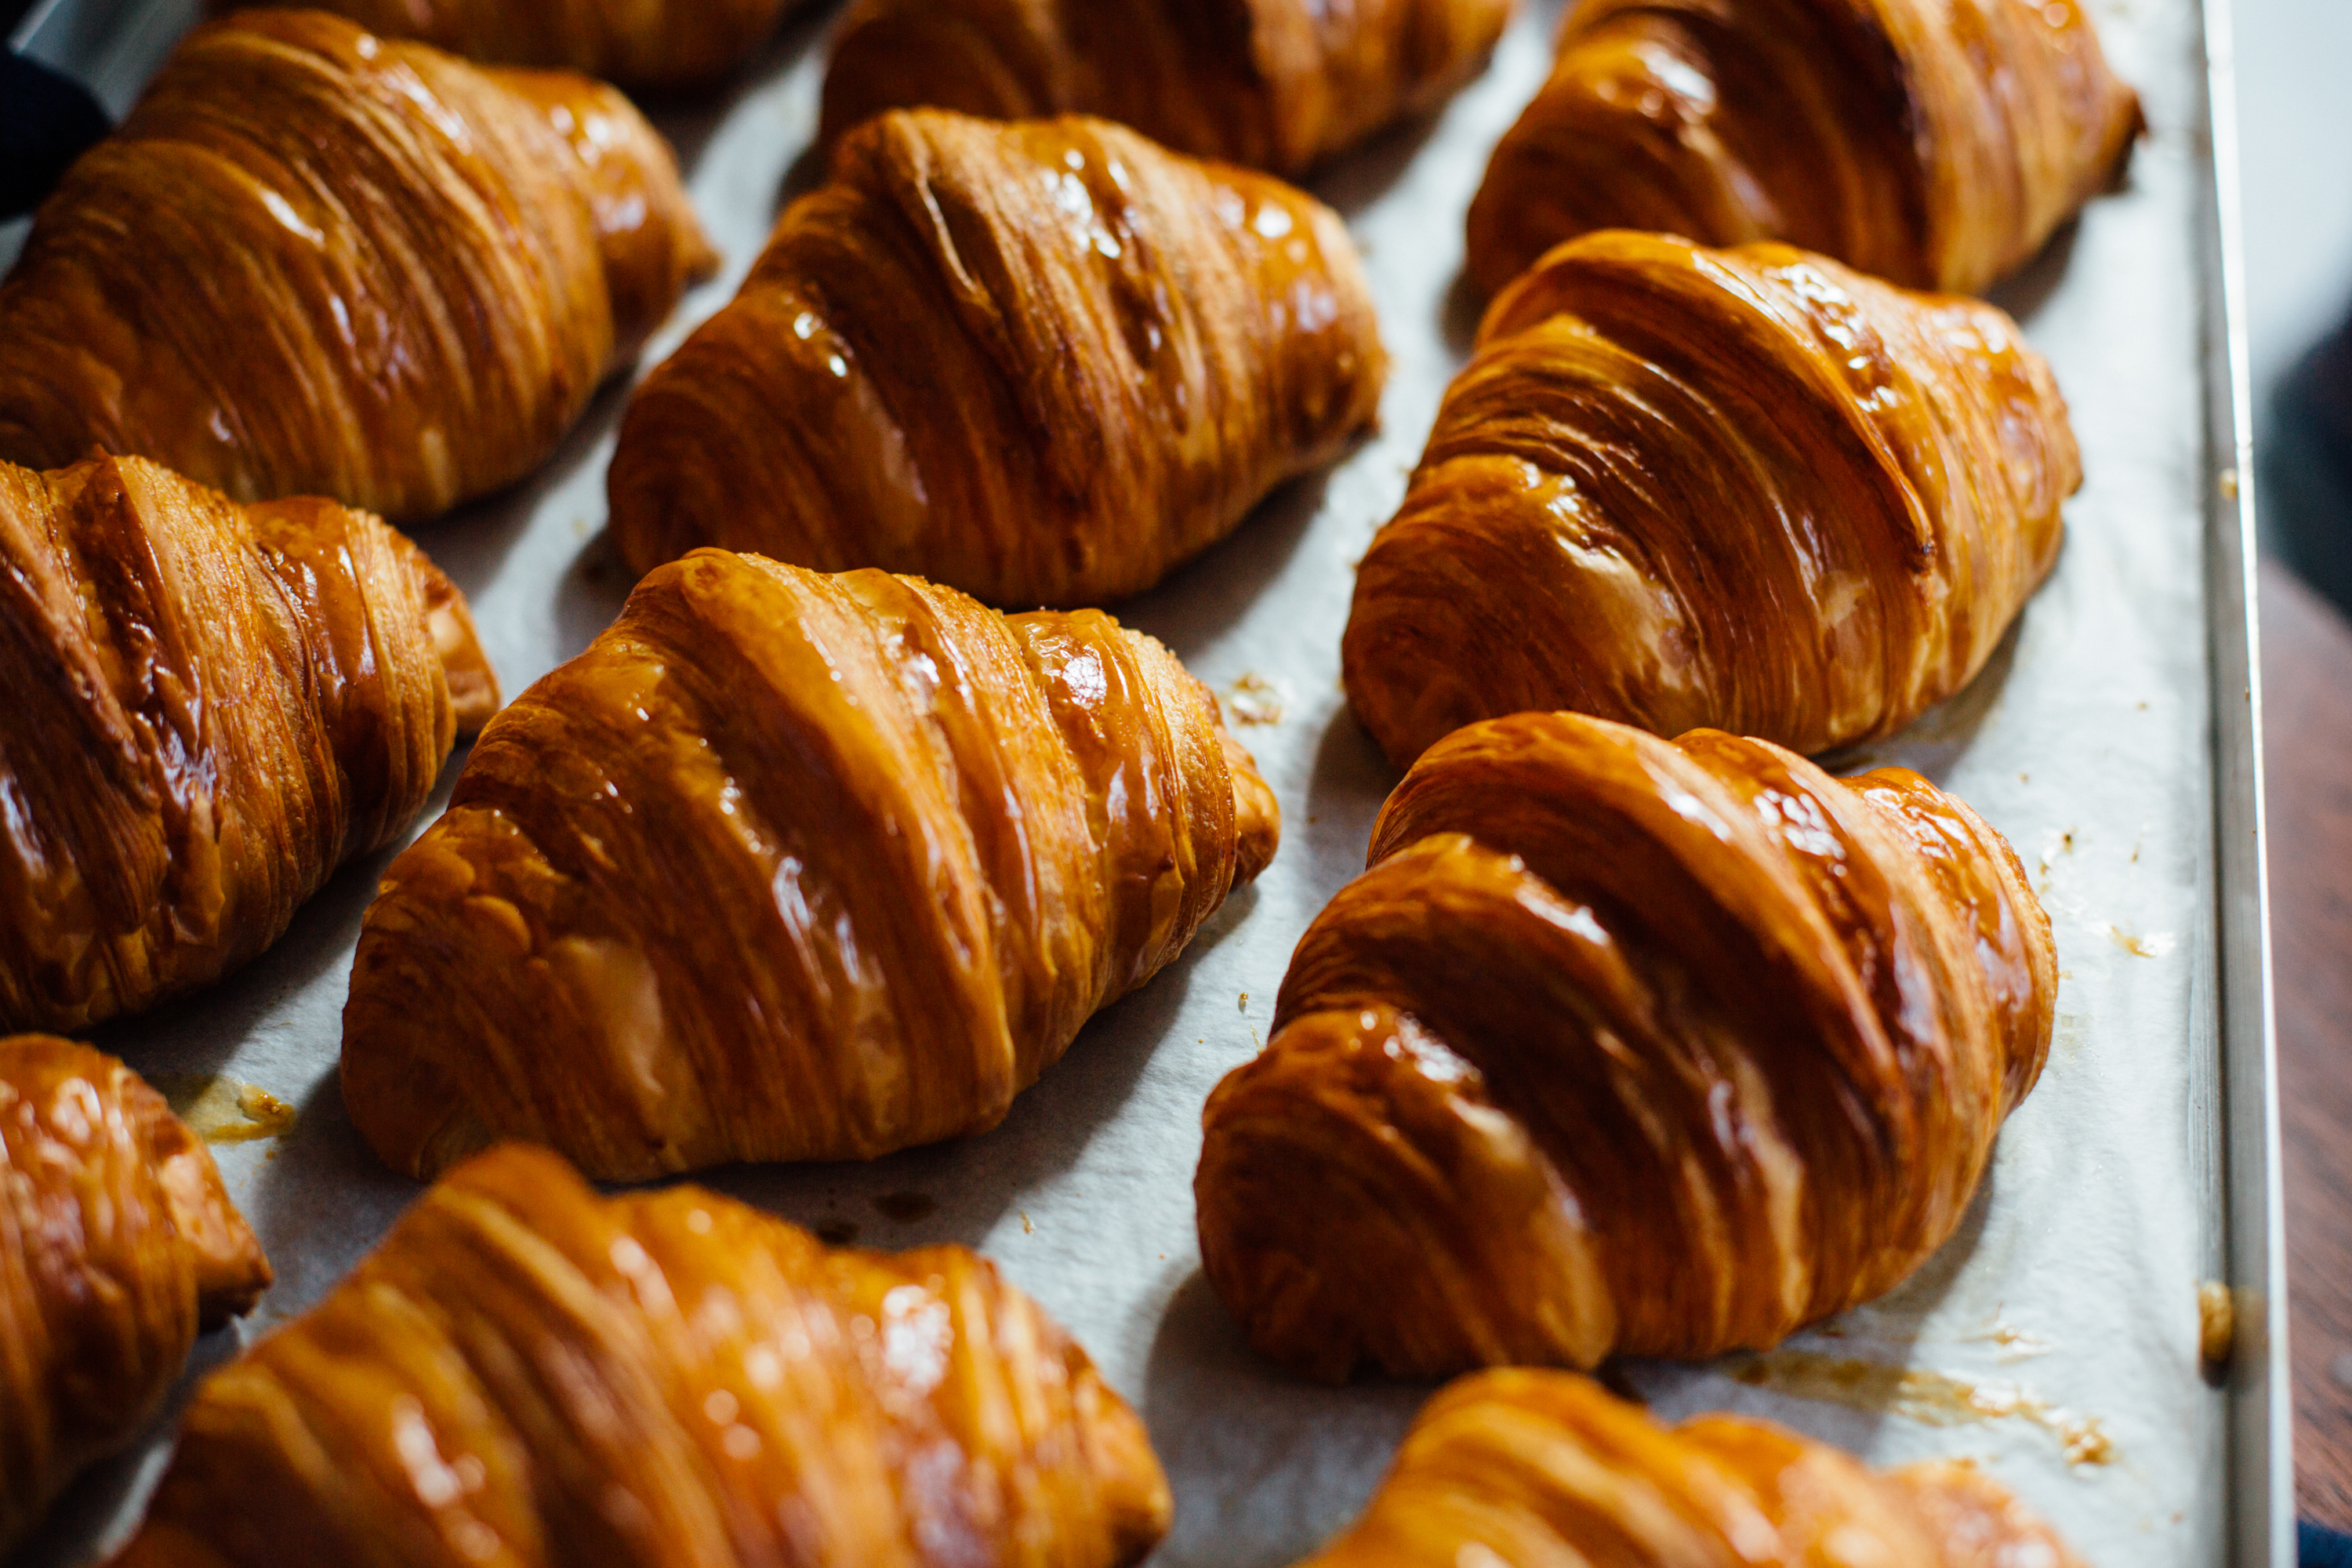 Rows of croissants at one of the best bakeries Melbourne has to offer, Lune.